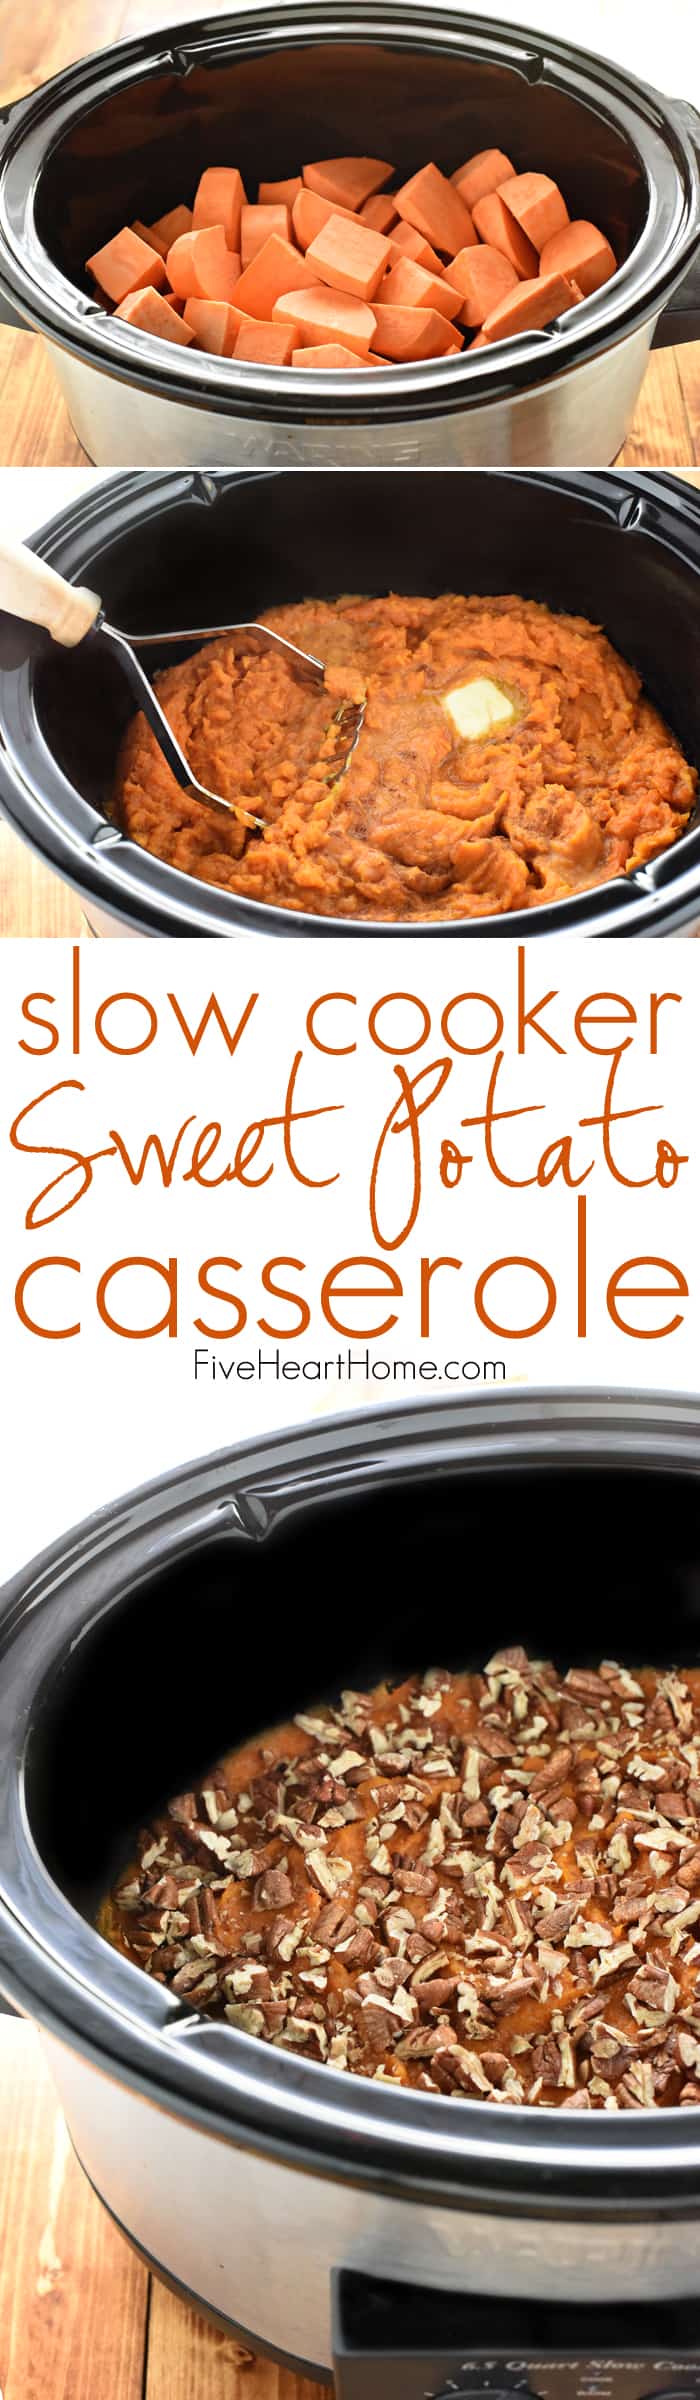 Slow Cooker Sweet Potato Casserole, two-photo collage with text.